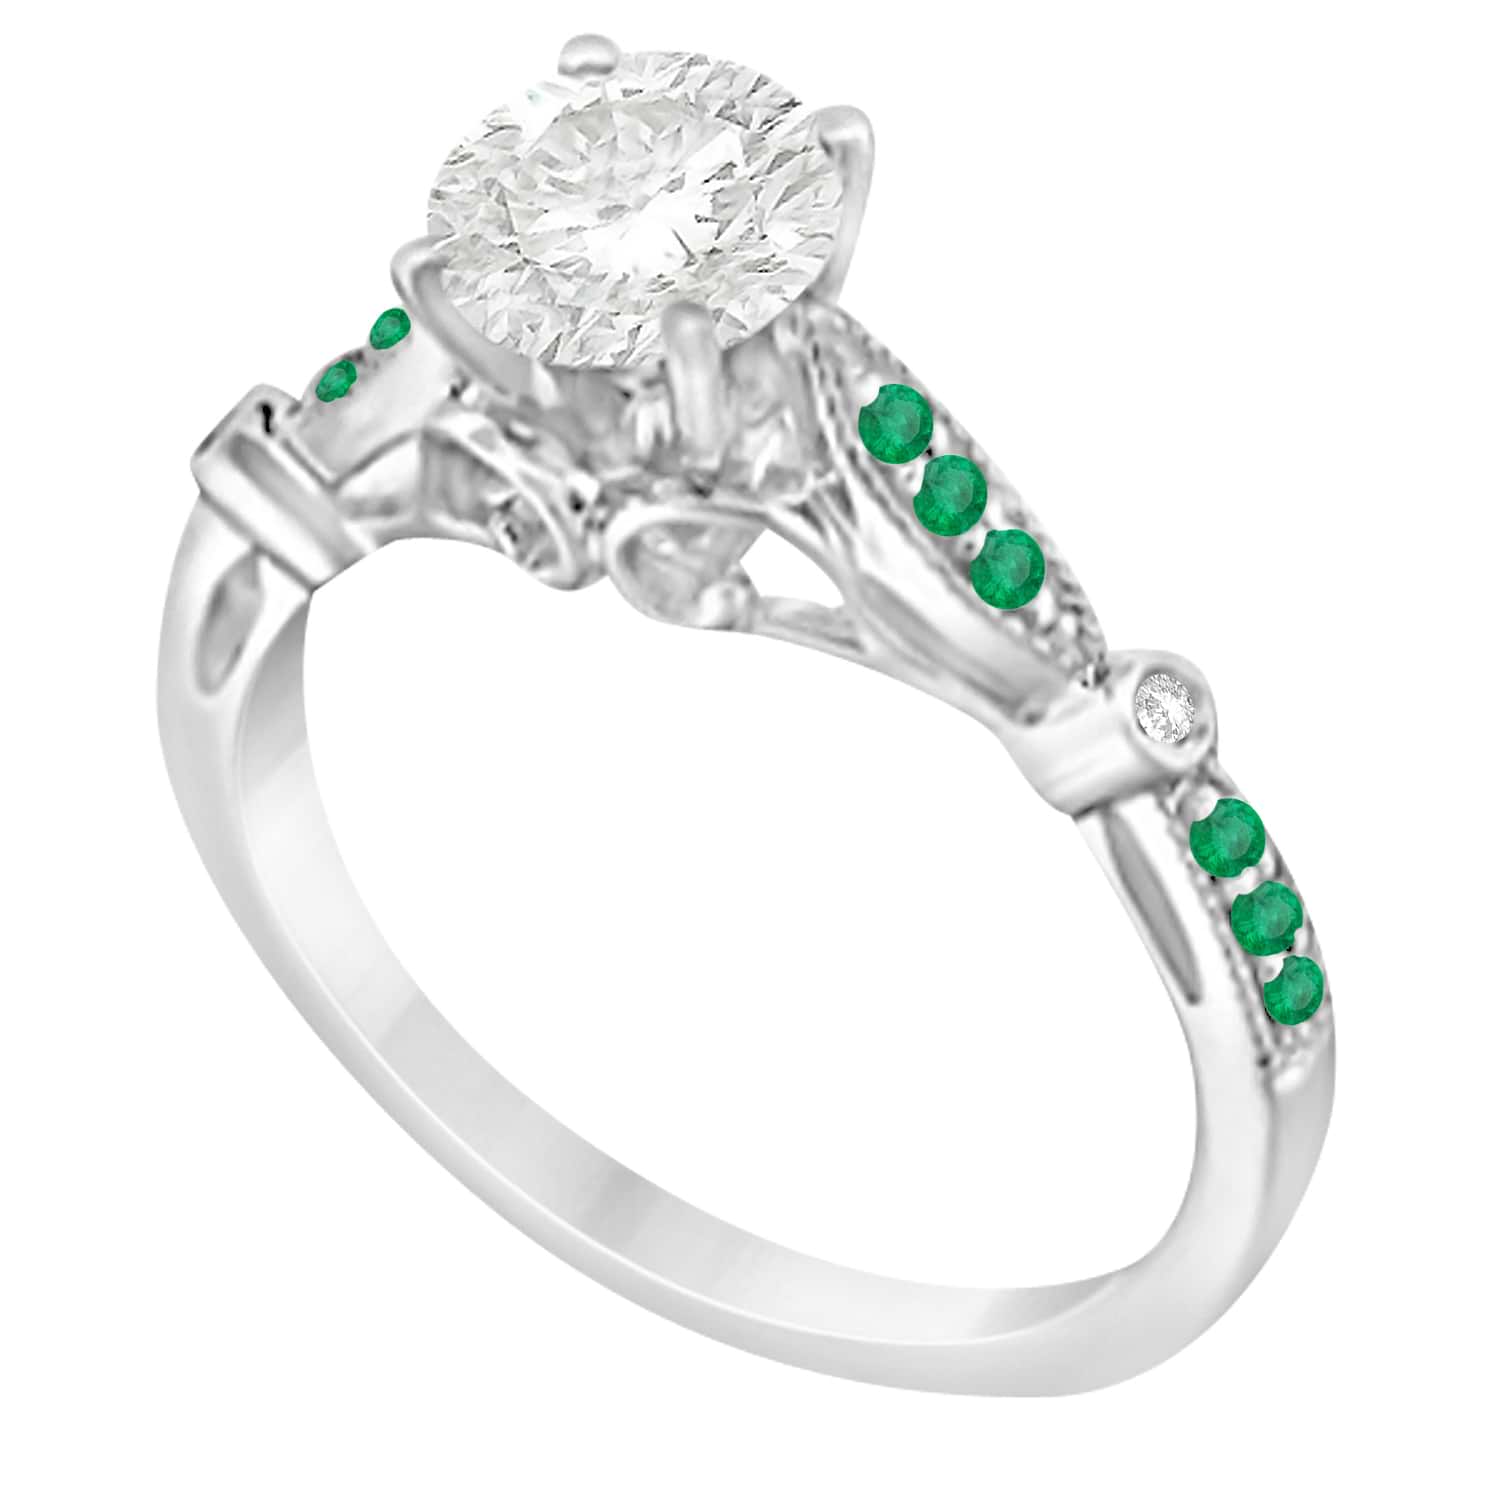 Marquise & Dot Emerald Vintage Engagement Ring 14k White Gold 0.13ct